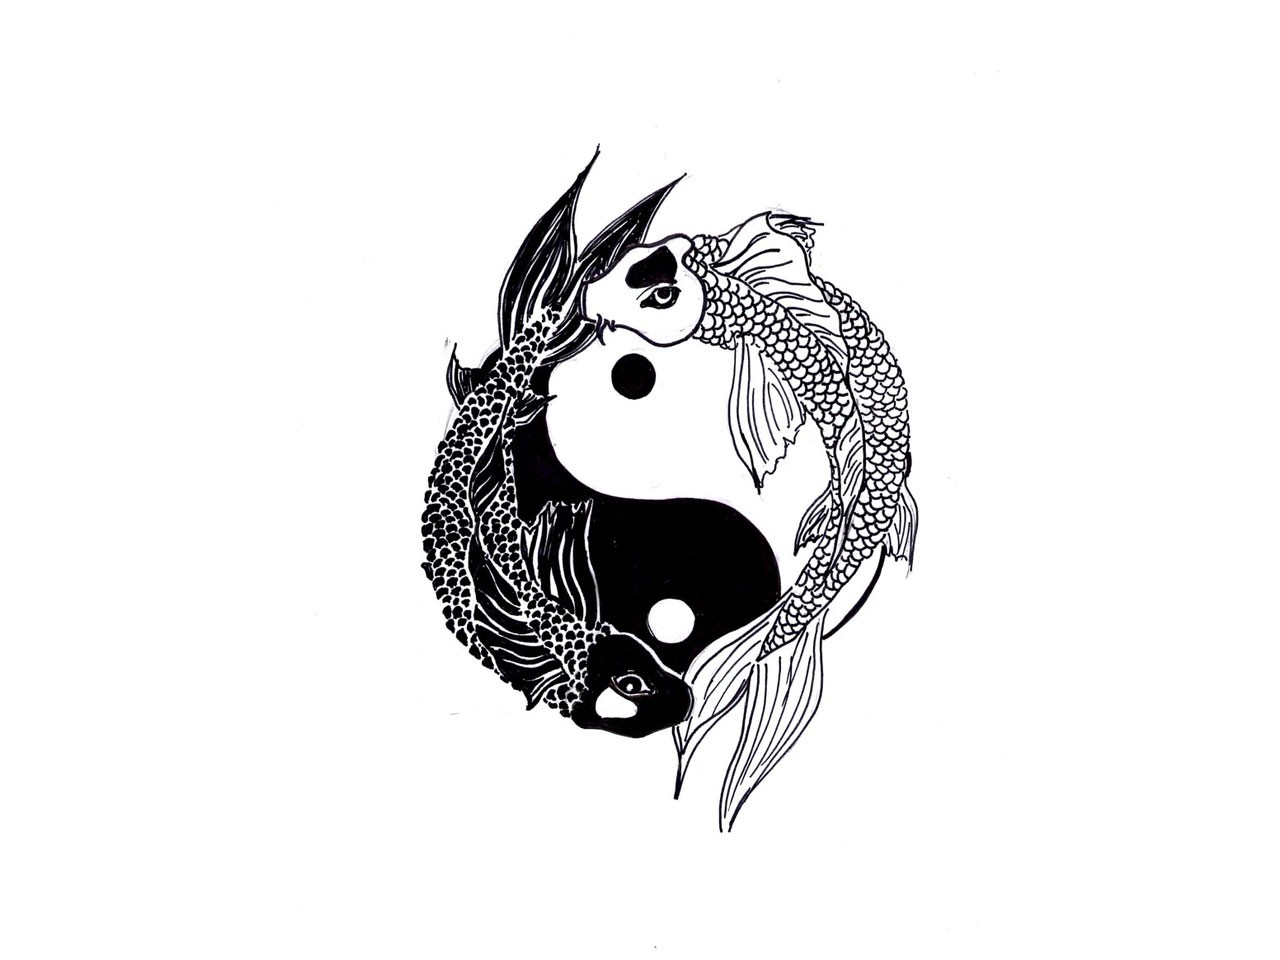 Free designs - Black and white yin yang fishes tattoo wallpaper